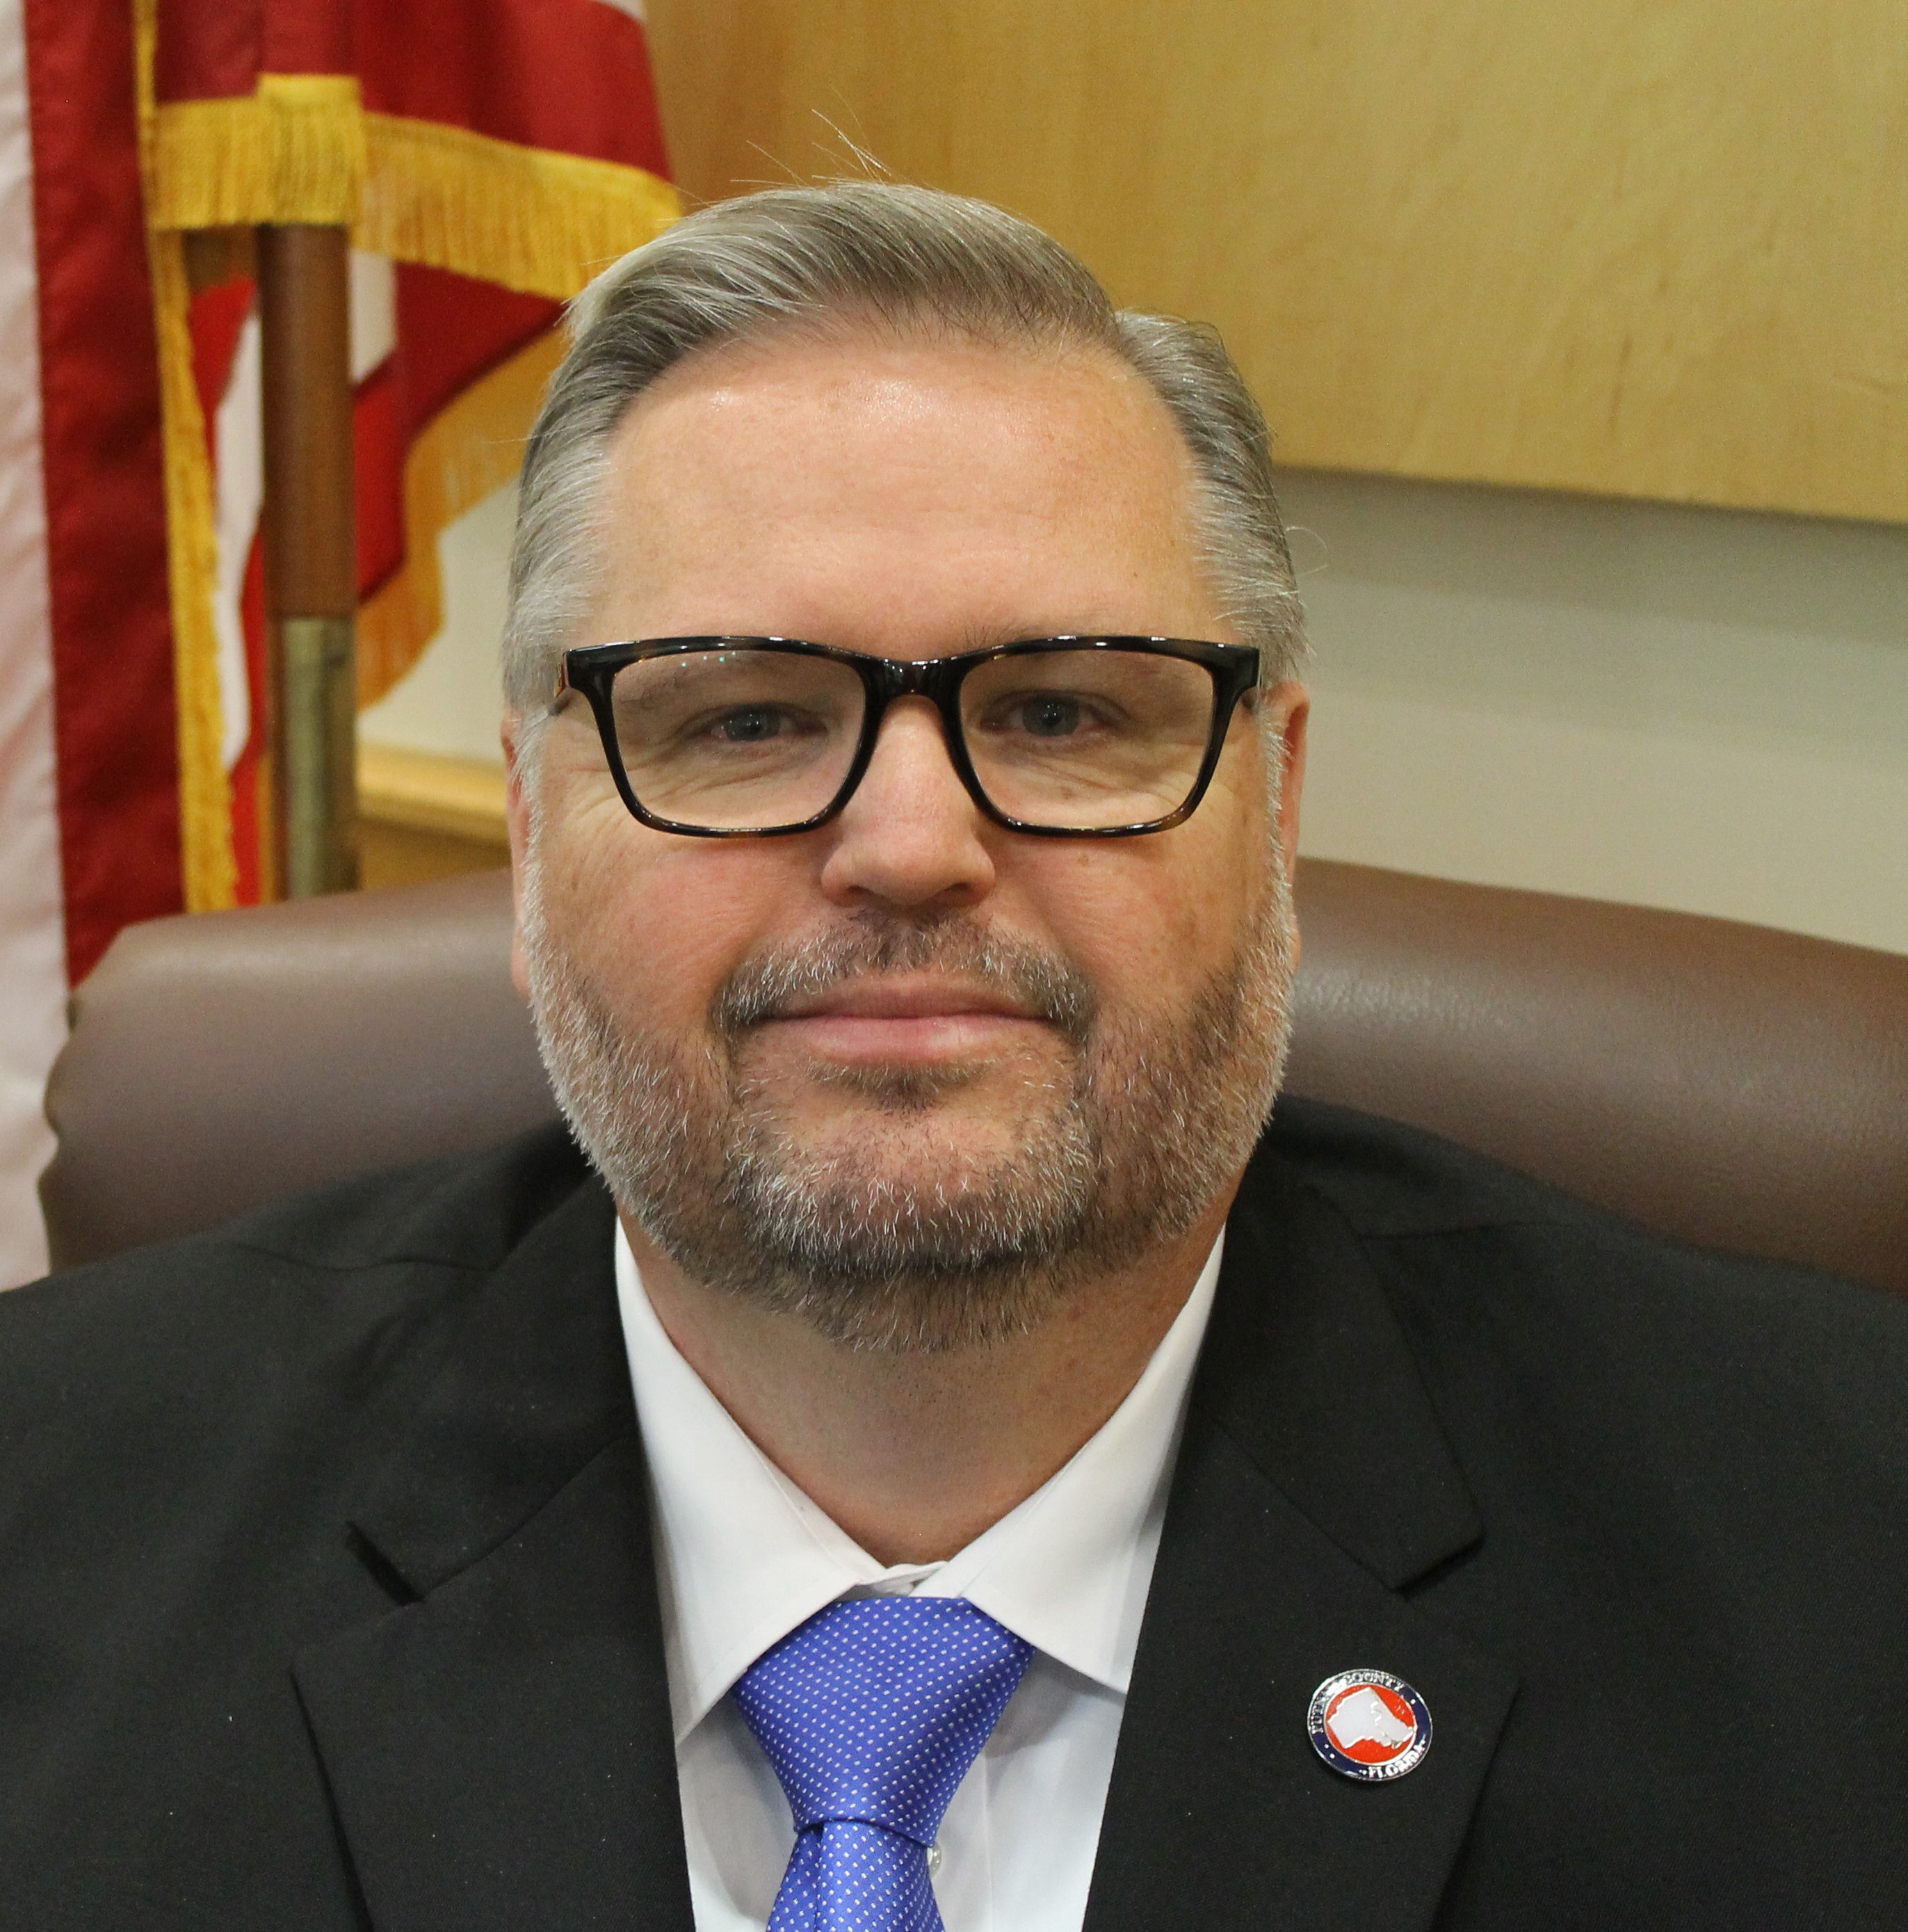 Terry Suggs, County Administrator